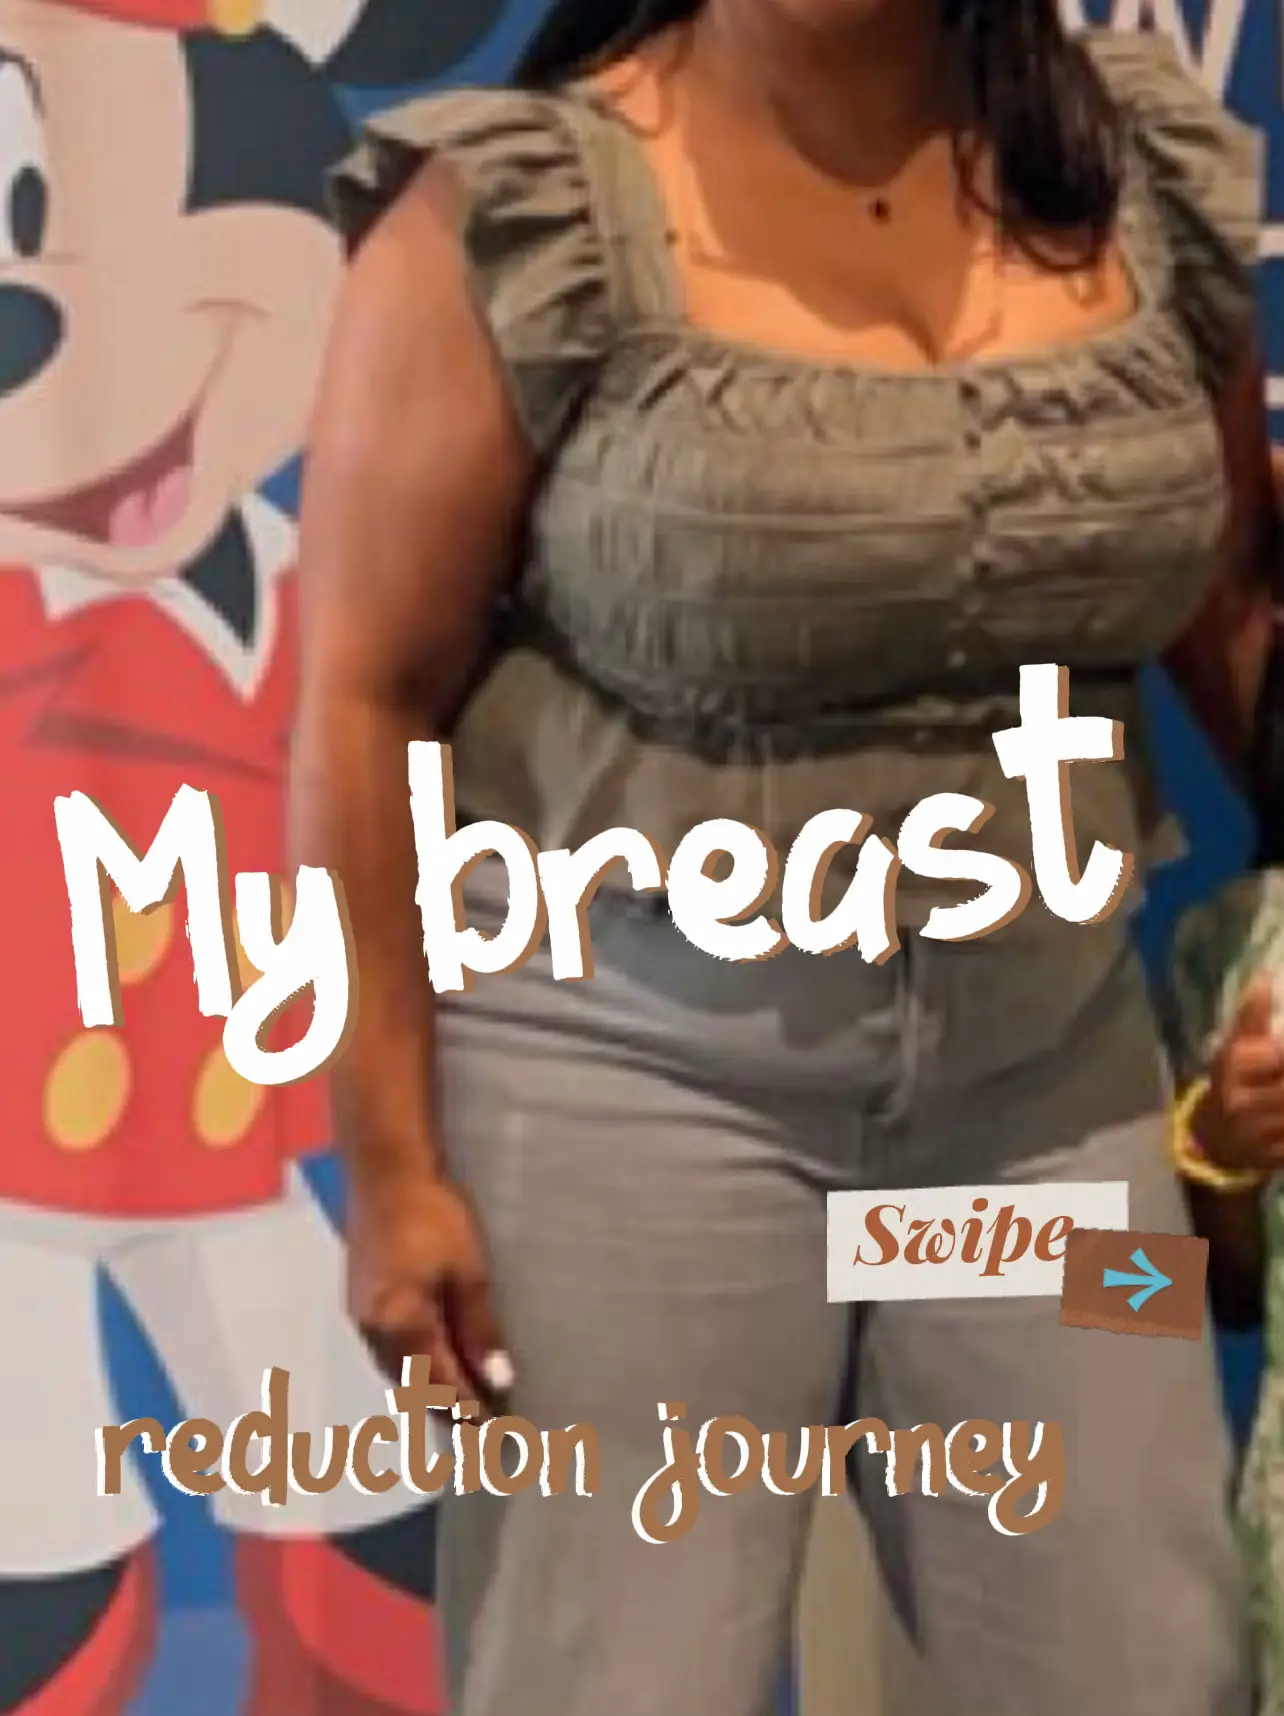 My size P boobs ruined my life - now I've dropped 21 cup sizes and can  finally breathe